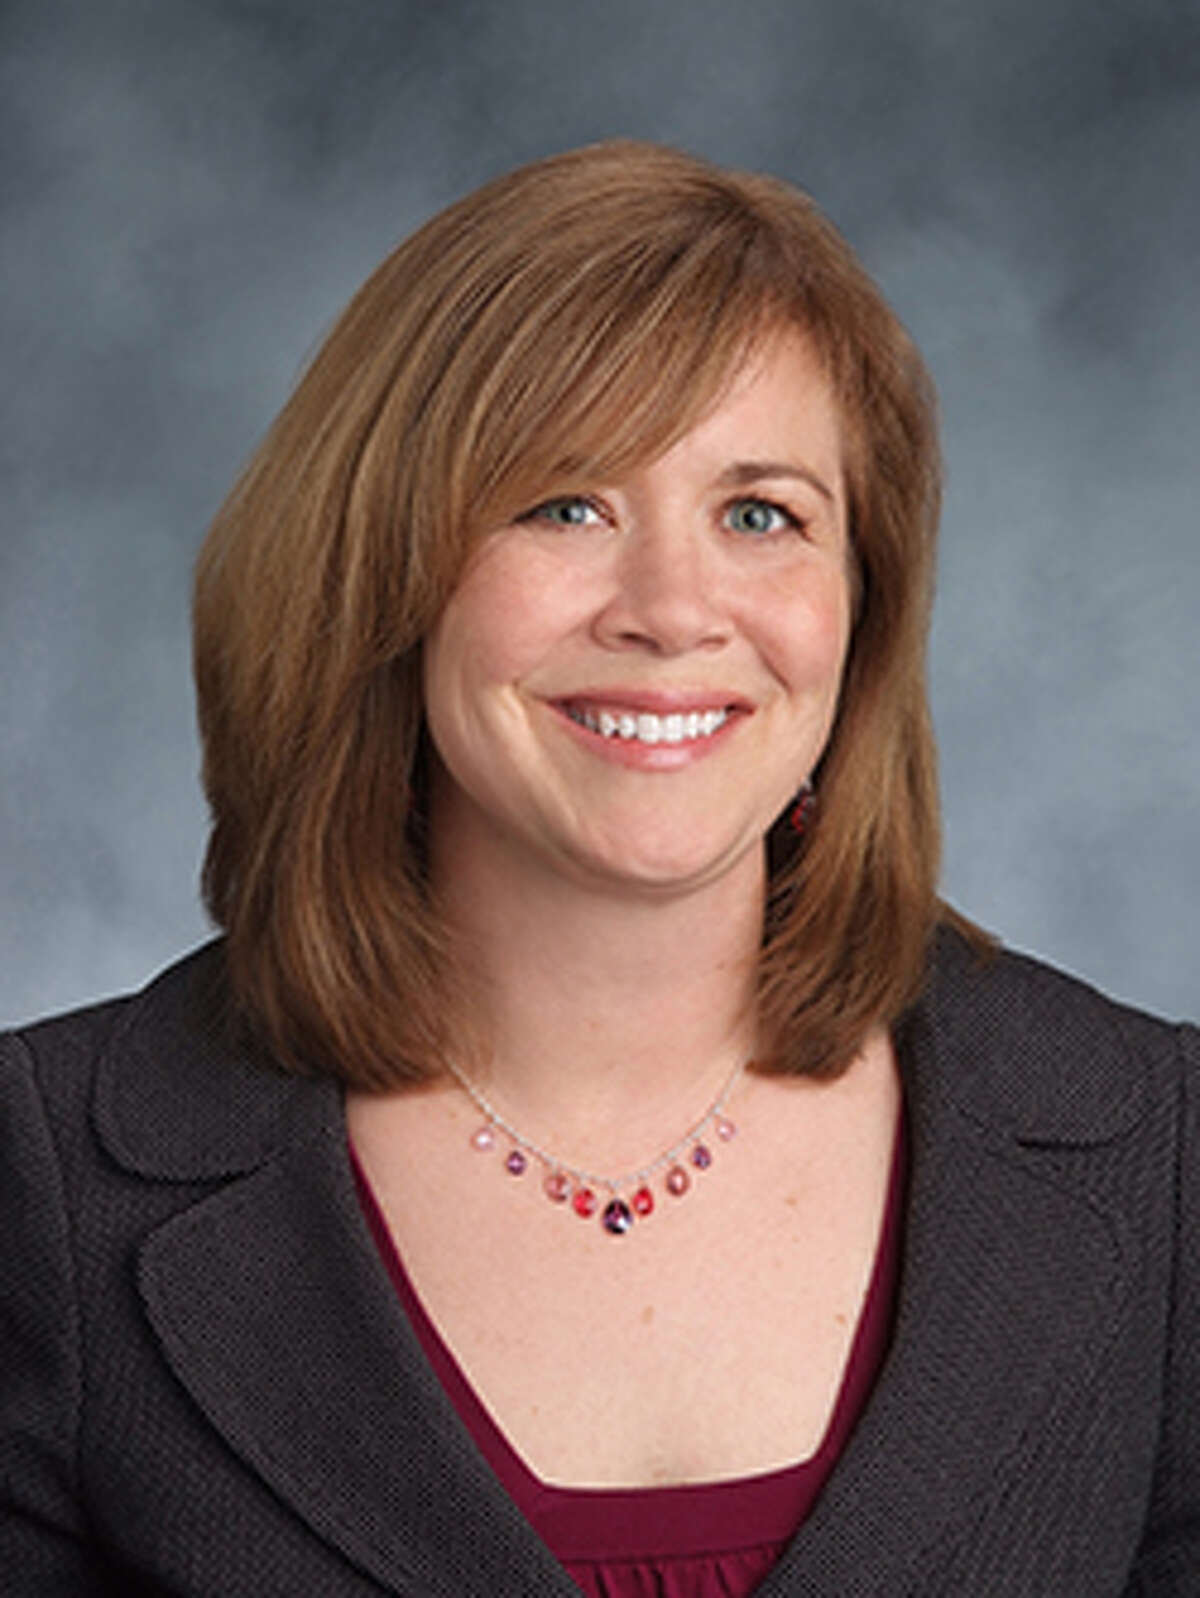 Albany Law School announced on Jan. 22, 2015, that Alicia Ouellette was been named dean of the law school, making her the 18th dean in its 163-year history. She is a 1994 graduate of the school. (Albany Law School photo)